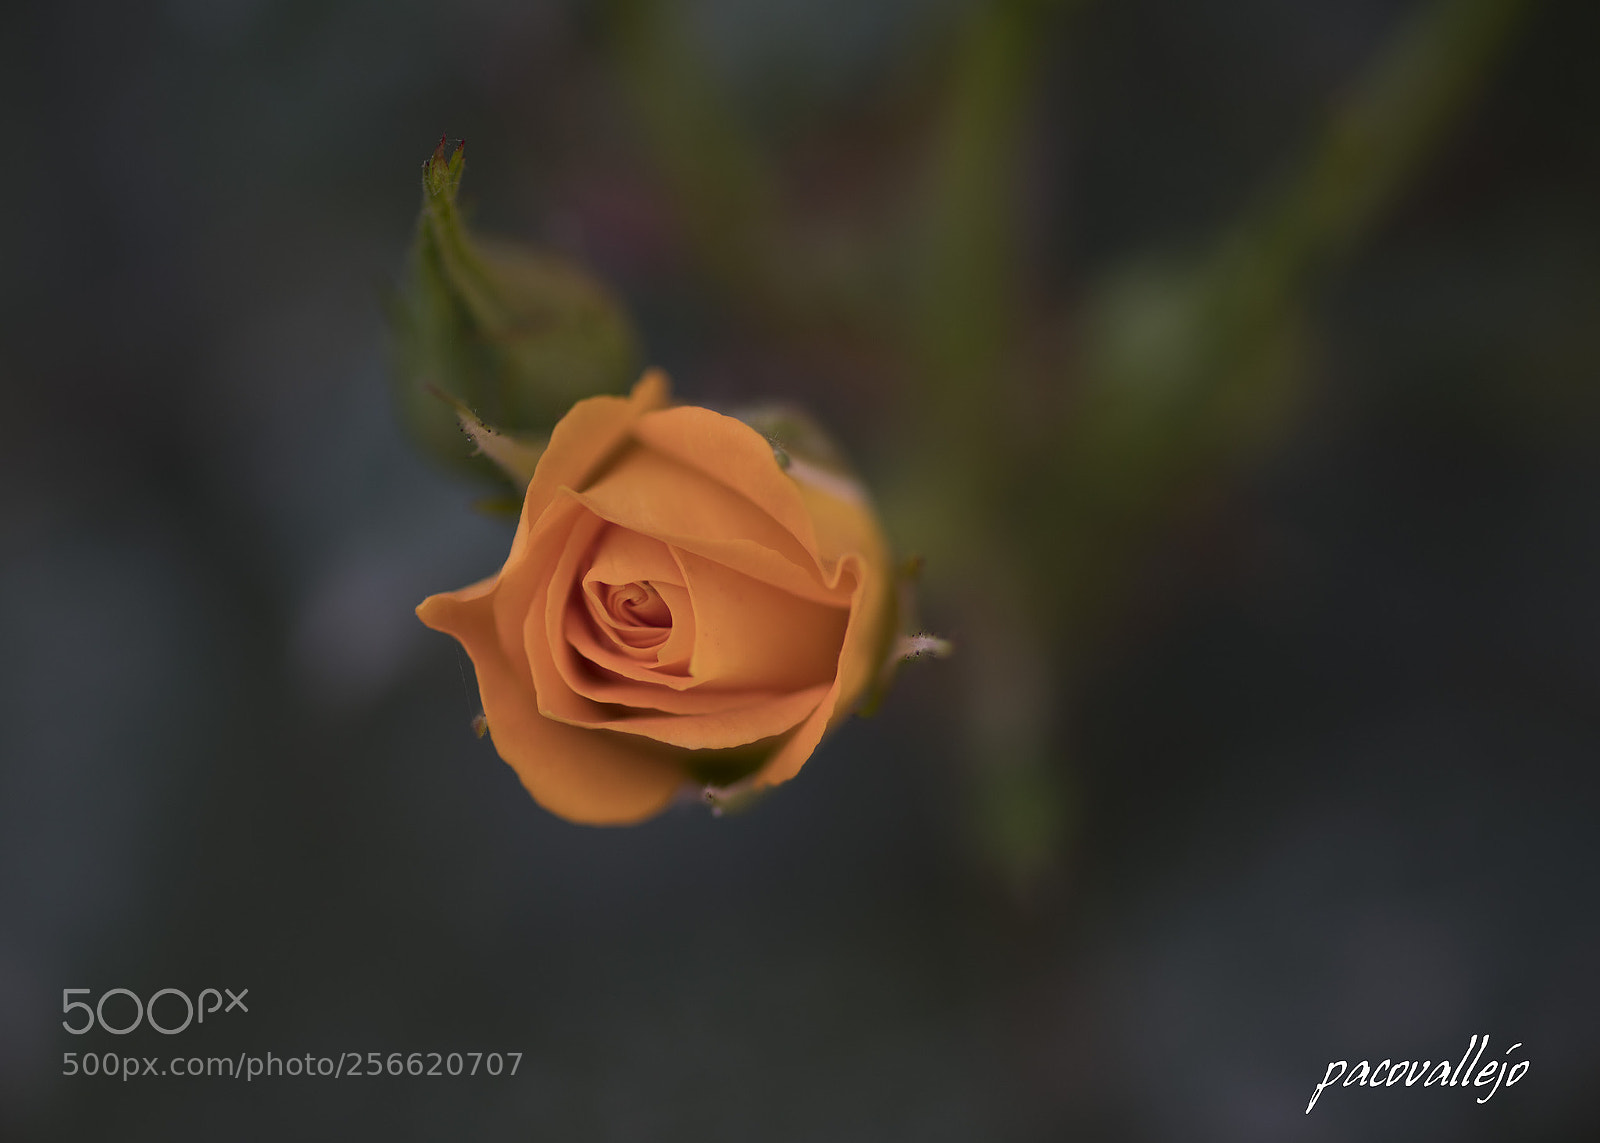 Sony a99 II sample photo. The rose photography